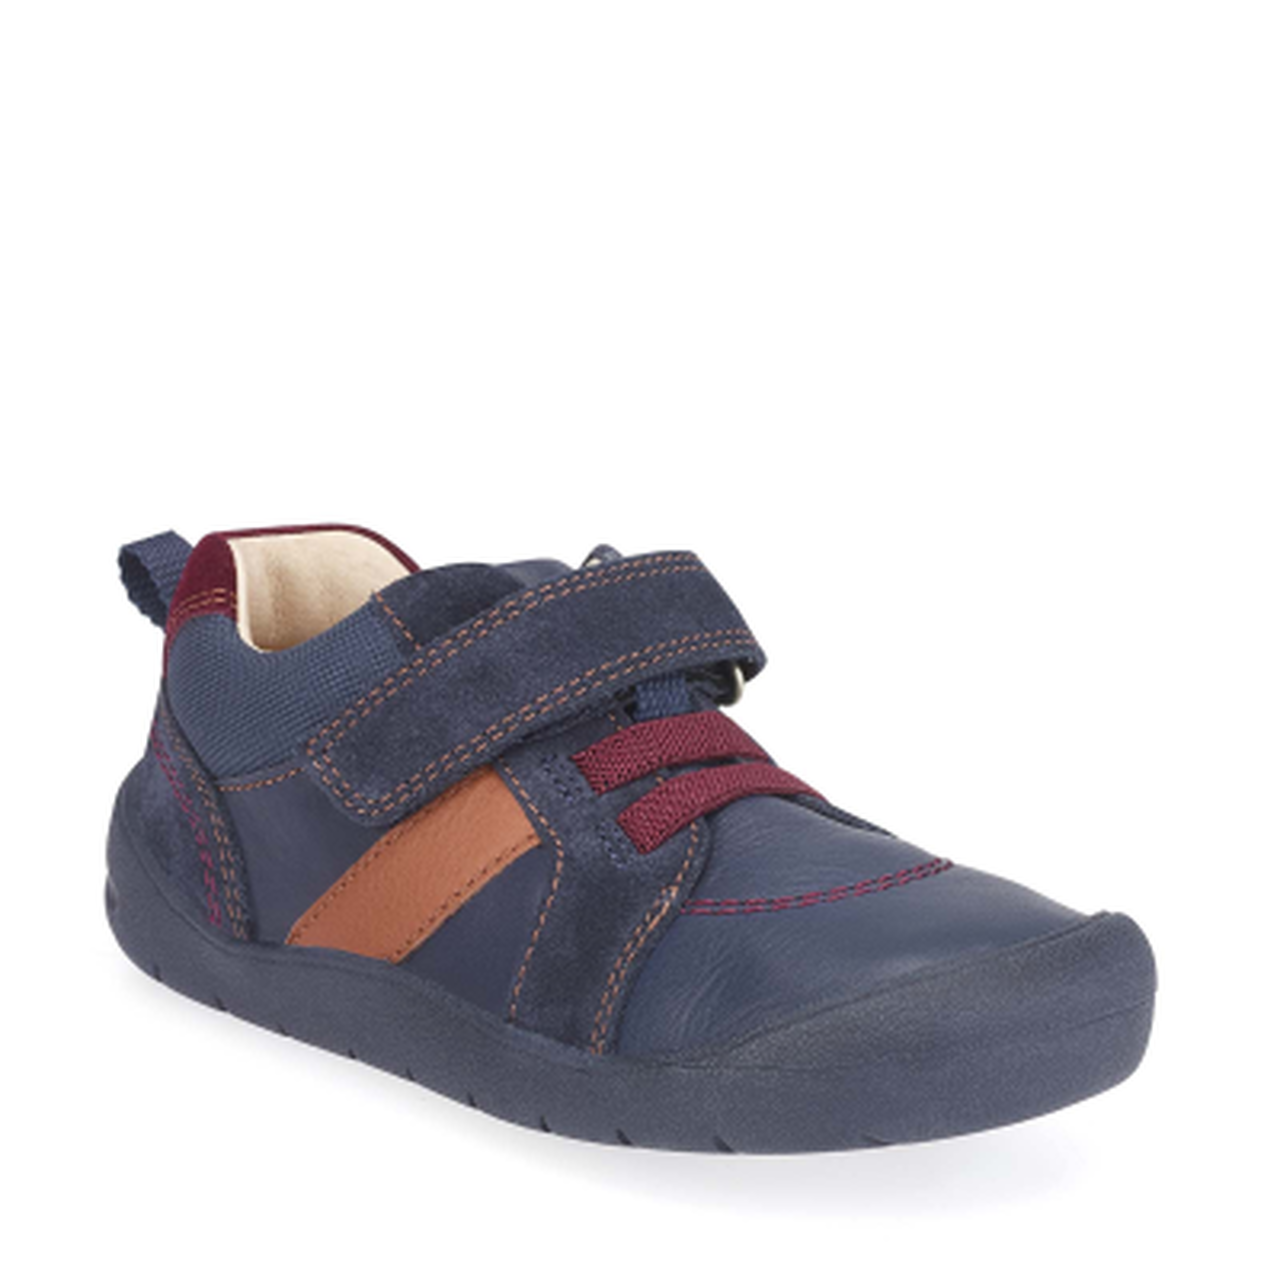 Start-Rite Twist Navy Leather/Suede Hook and Loop Strap First Steps Shoe - elevate your sole